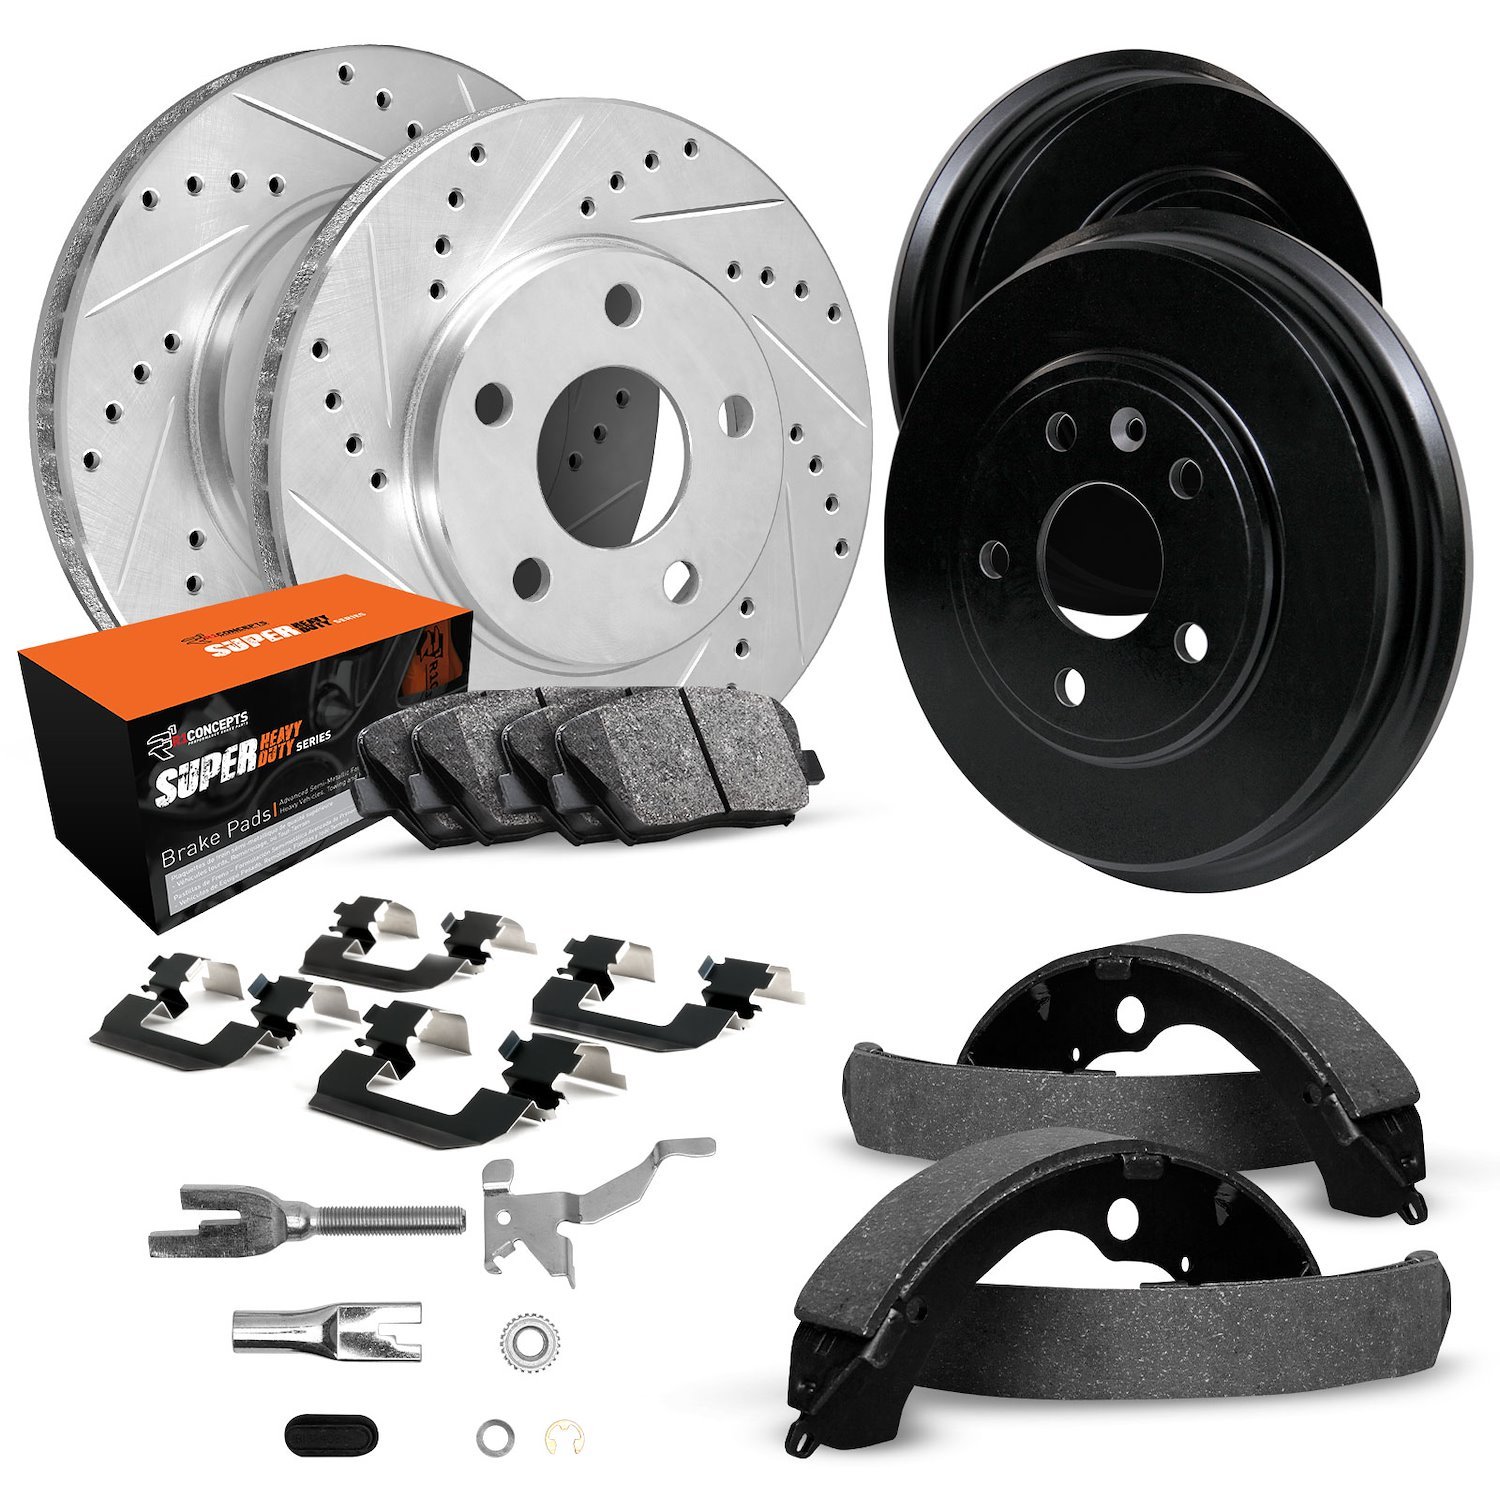 E-Line Drilled/Slotted Silver Rotor & Drum Set w/Super-Duty Pads, Shoes/Hardware/Adjusters, 2000-2004 Ford/Lincoln/Mercury/Mazda